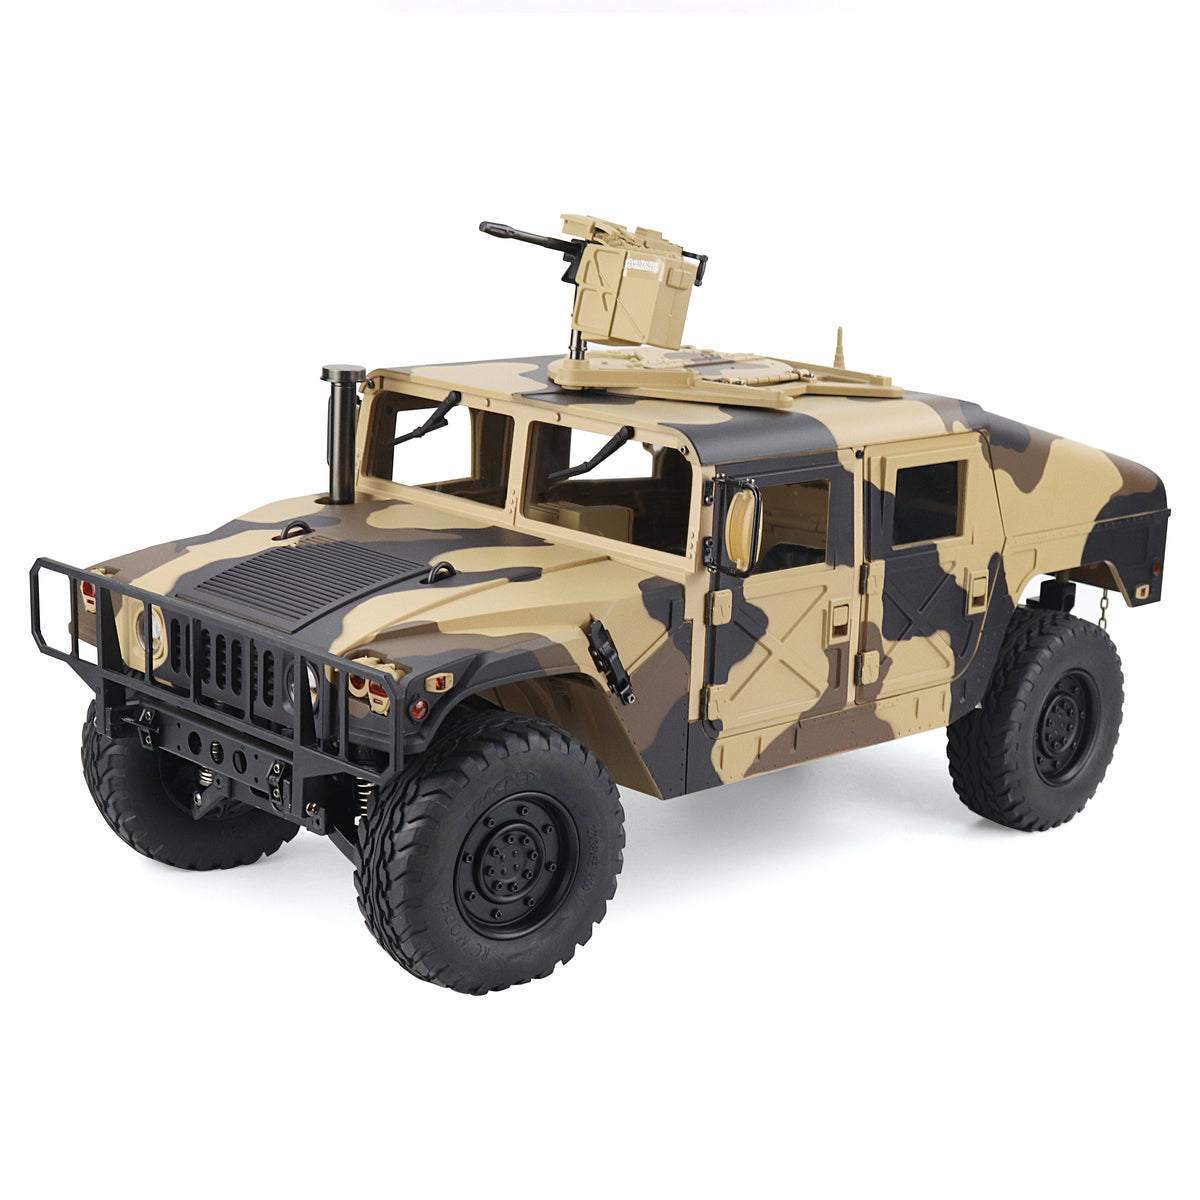 HG P408 RC U.S. ARMY MILITARY HUMVEE NOTE: Battery and charger not included!